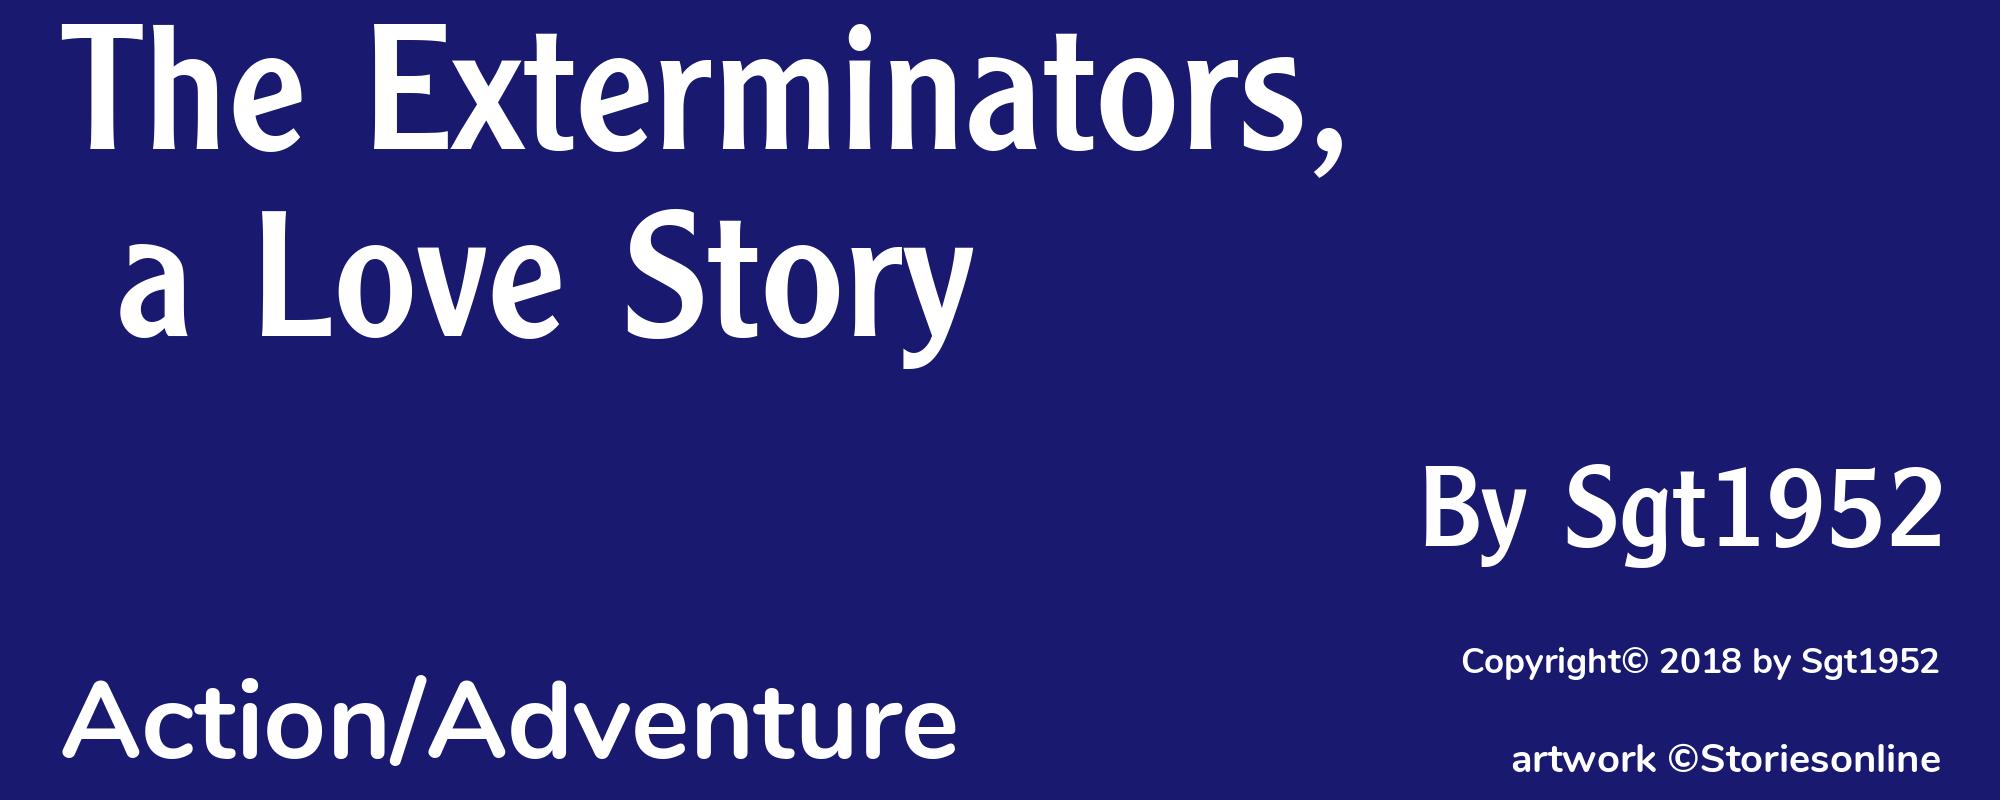 The Exterminators, a Love Story - Cover